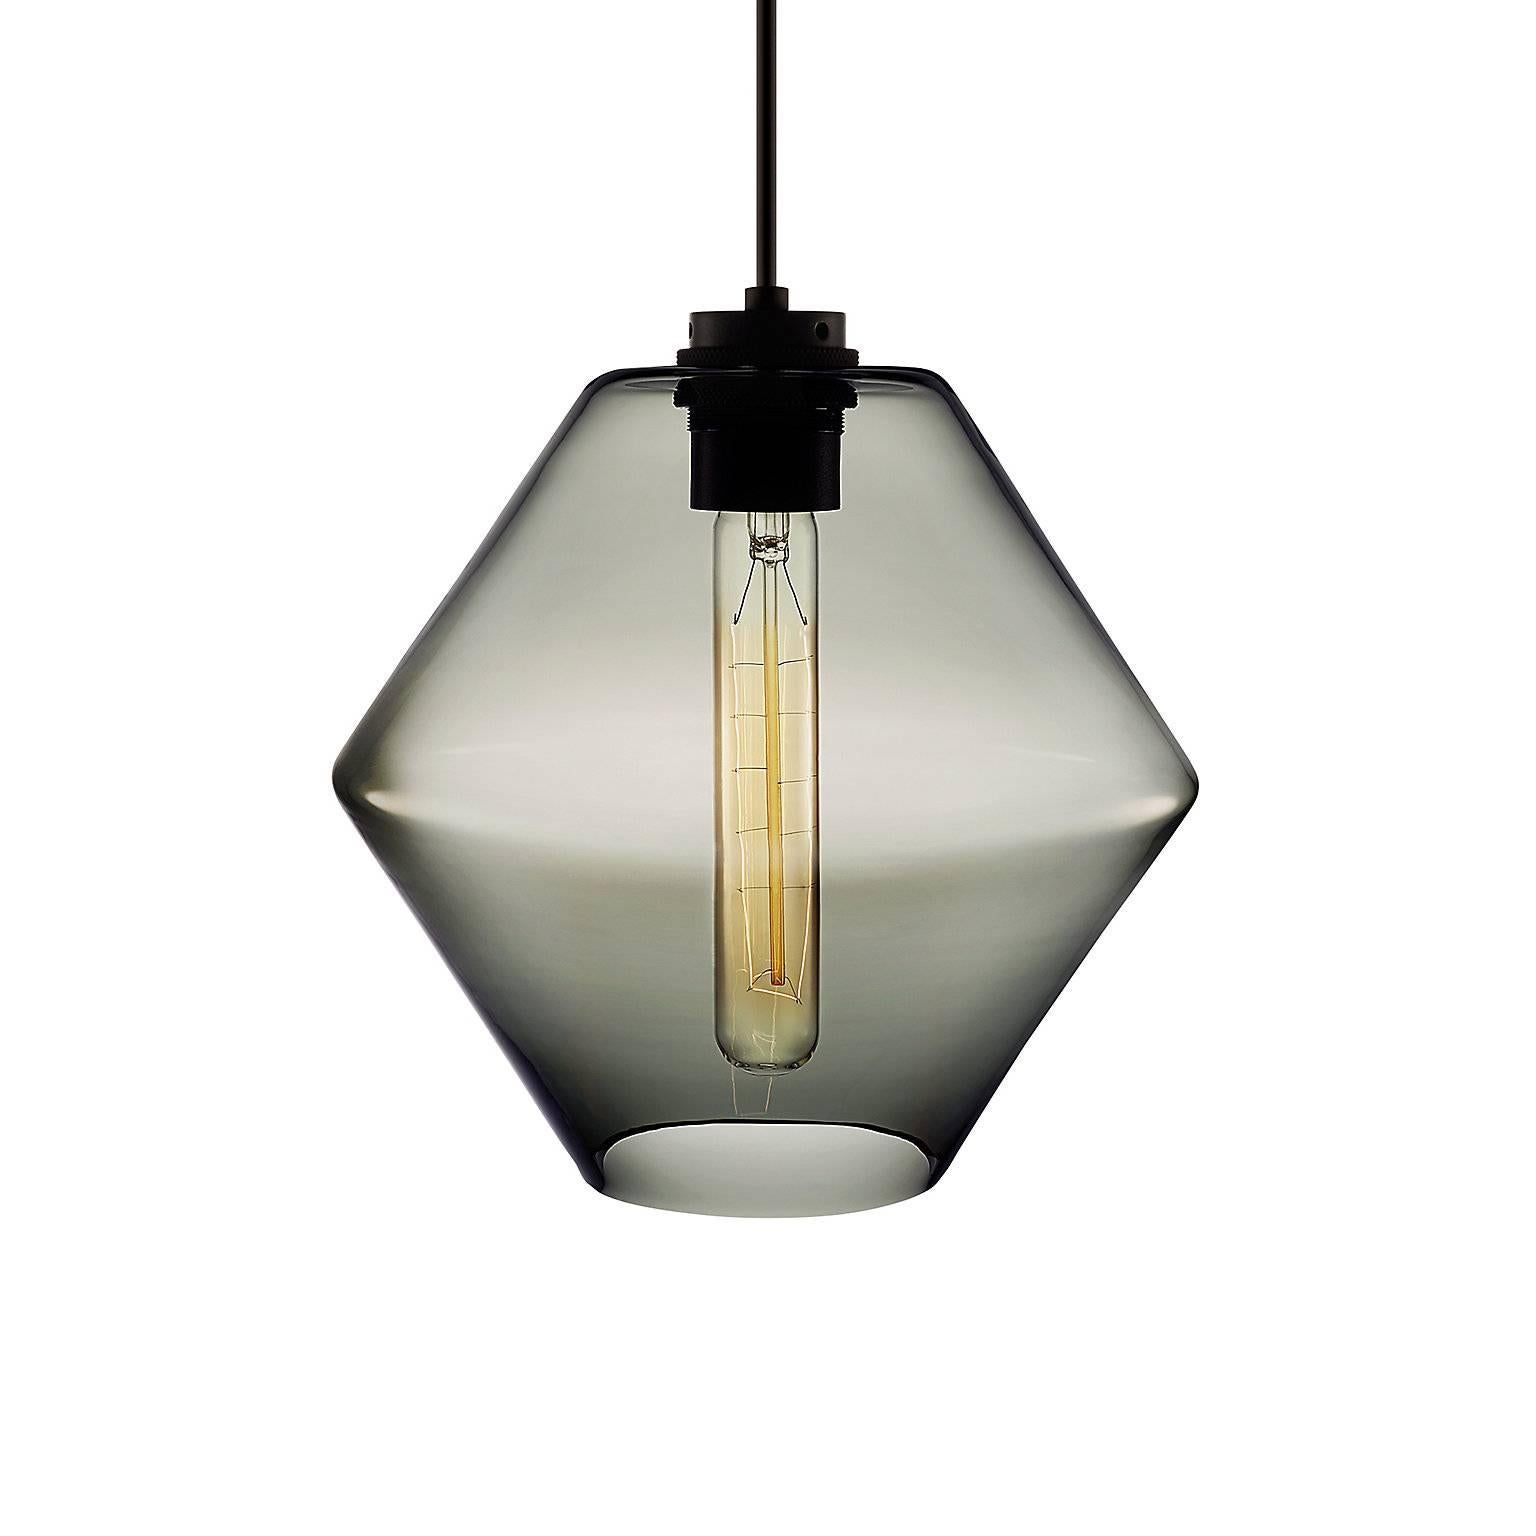 Unique to the Crystalline Series, the Trove pendant light merges defined angles with bold colors. Pairs easily with the Delinea, Axia, and Calla pendants that also comprise the Crystalline Series. Every single glass pendant light that comes from